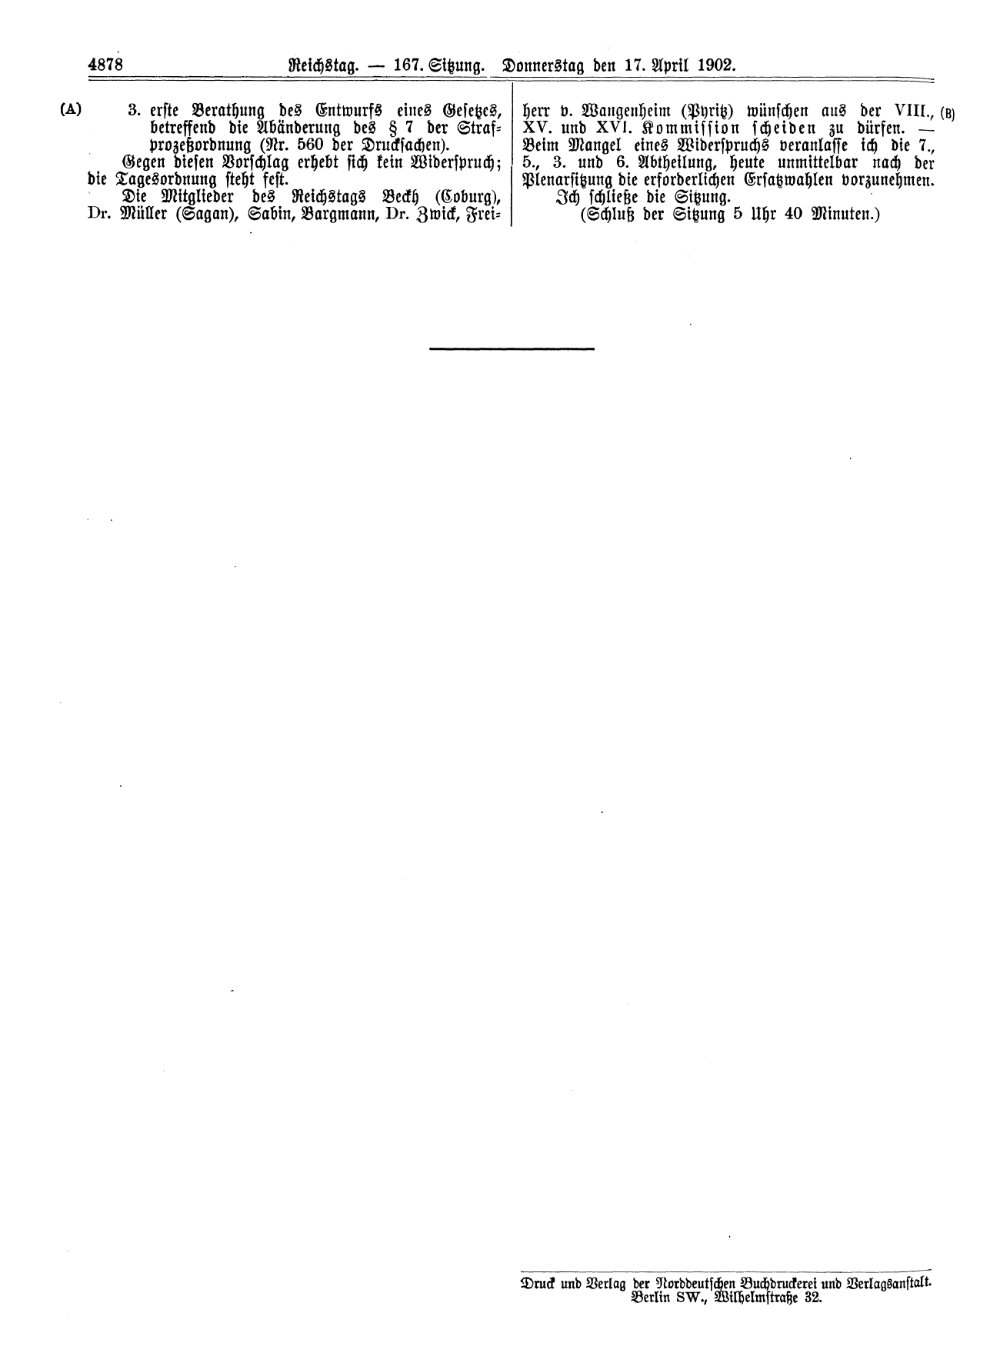 Scan of page 4878